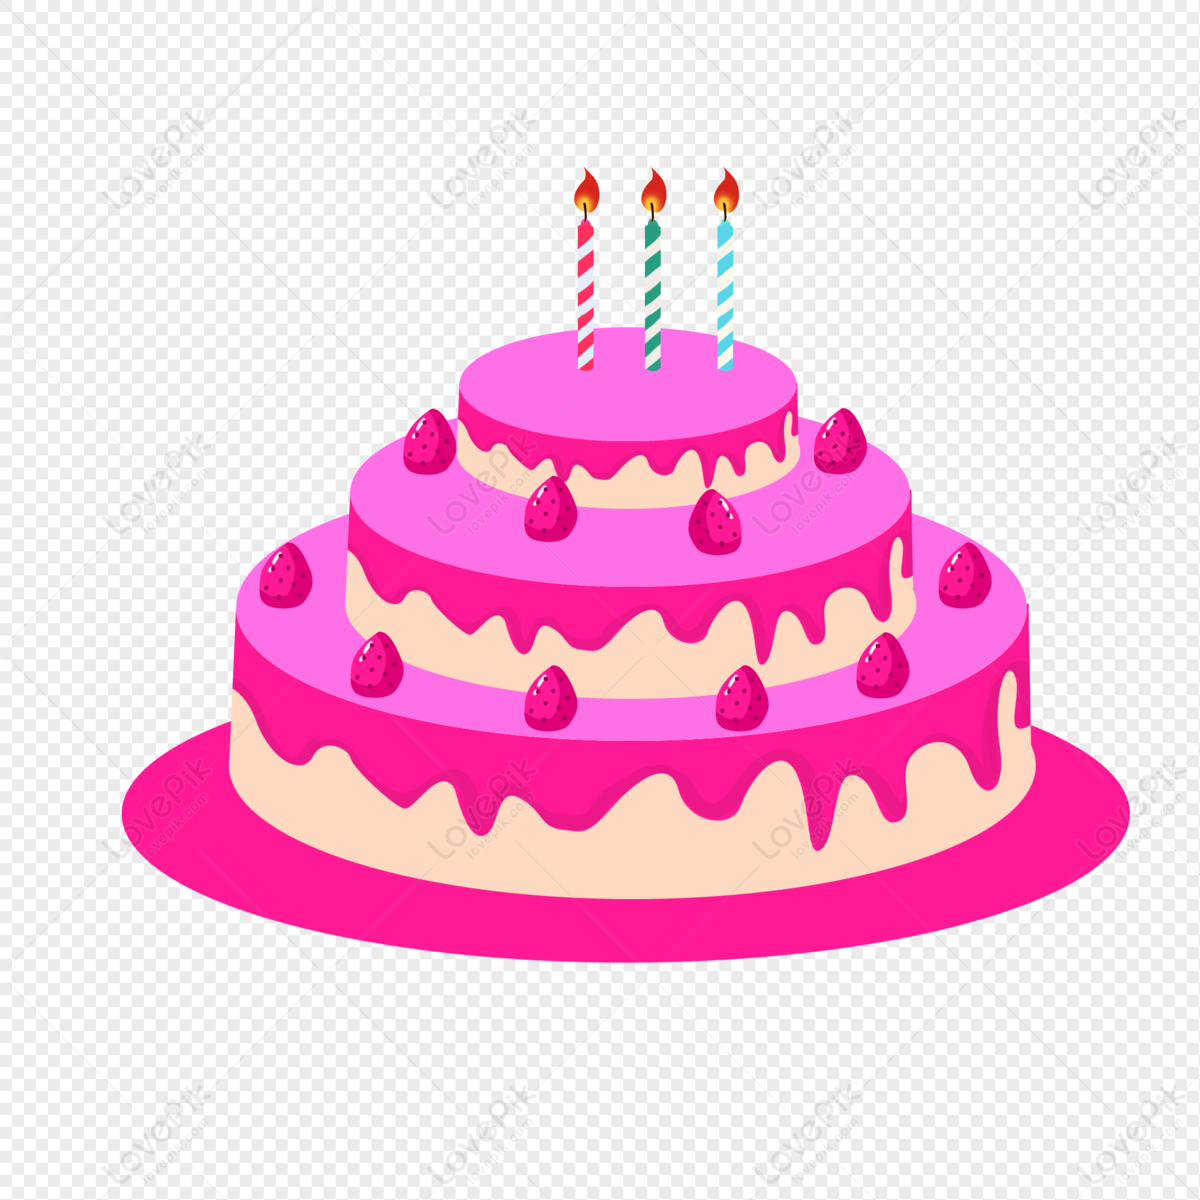 Happy birthday cake with 3 candle vector PNG - Similar PNG